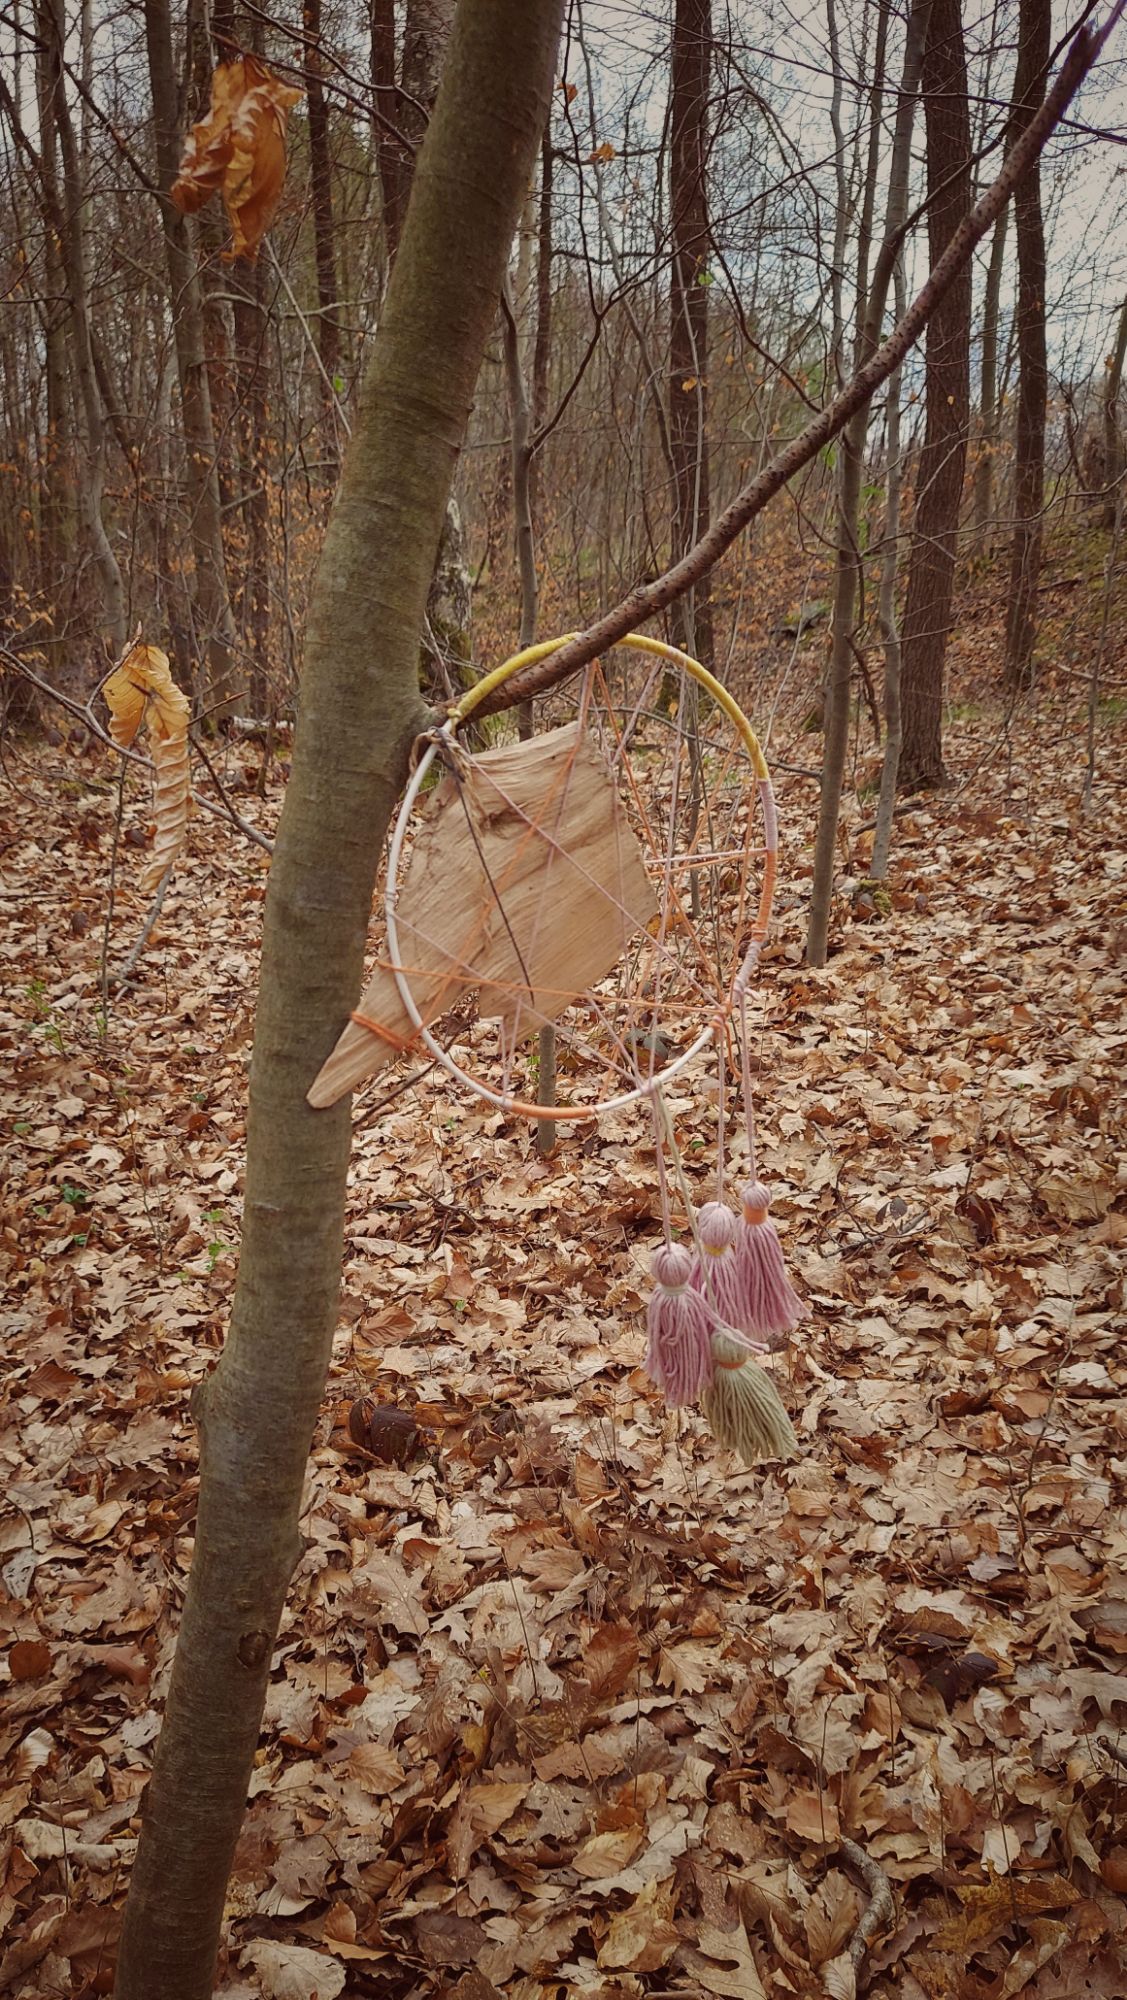 Forest art, dream catcher in a tree.